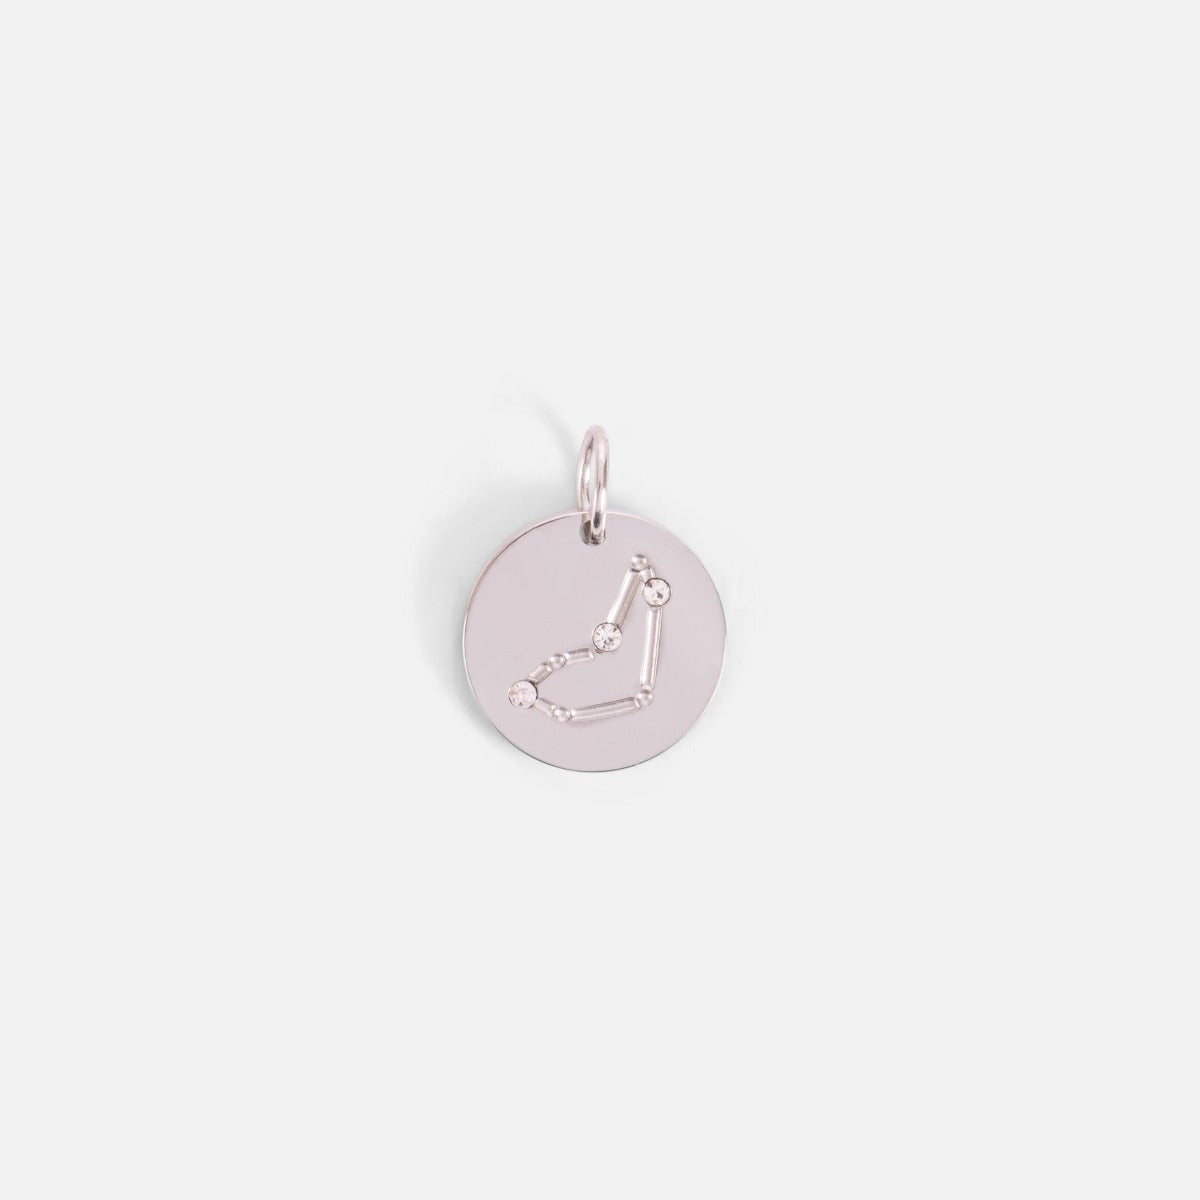 Small silvered charm engraved with the zodiac constellation "capricorn"   